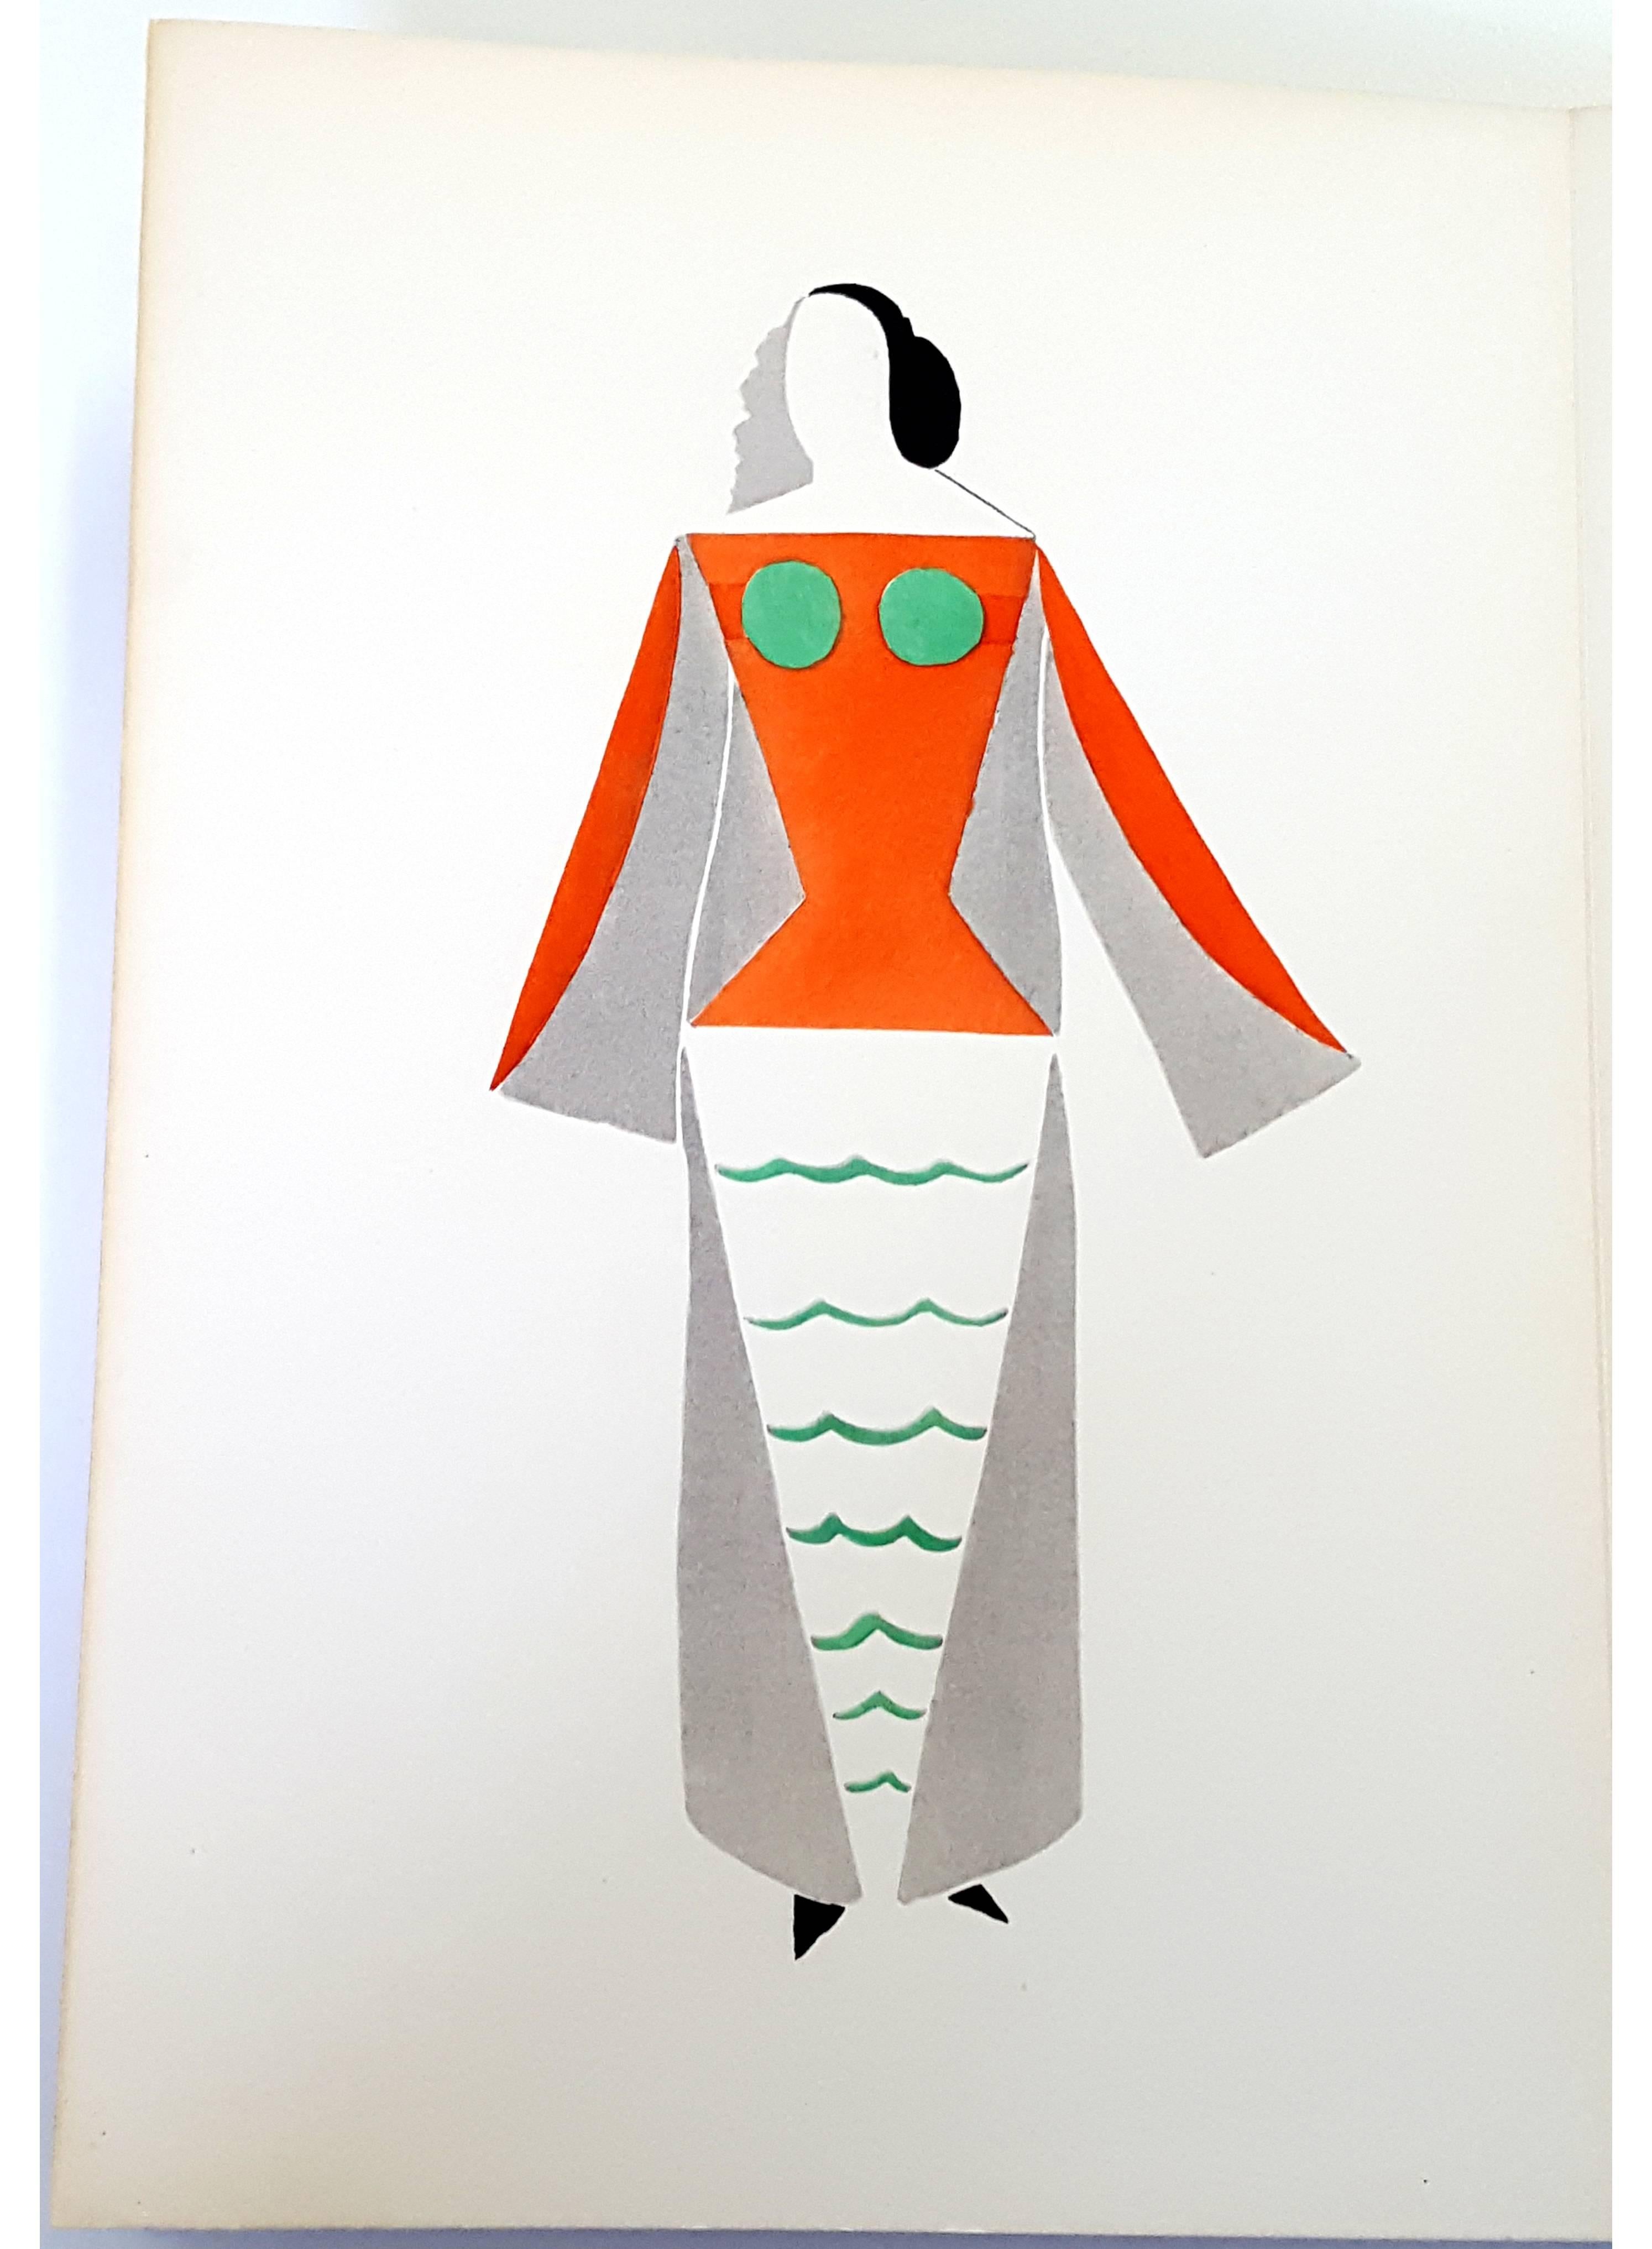 Full-page, colour pochoir of costume designs by Sonia Delaunay
Edition 331/500 copies on Velin Aussedat 
Dimensions: 28.5 x 19.5 cm.
From 27 Living Paintings. [Milano, Edizioni del Naviglio, 1969]. Jacques Damase. Robes Poèmes, Introduction. Text by